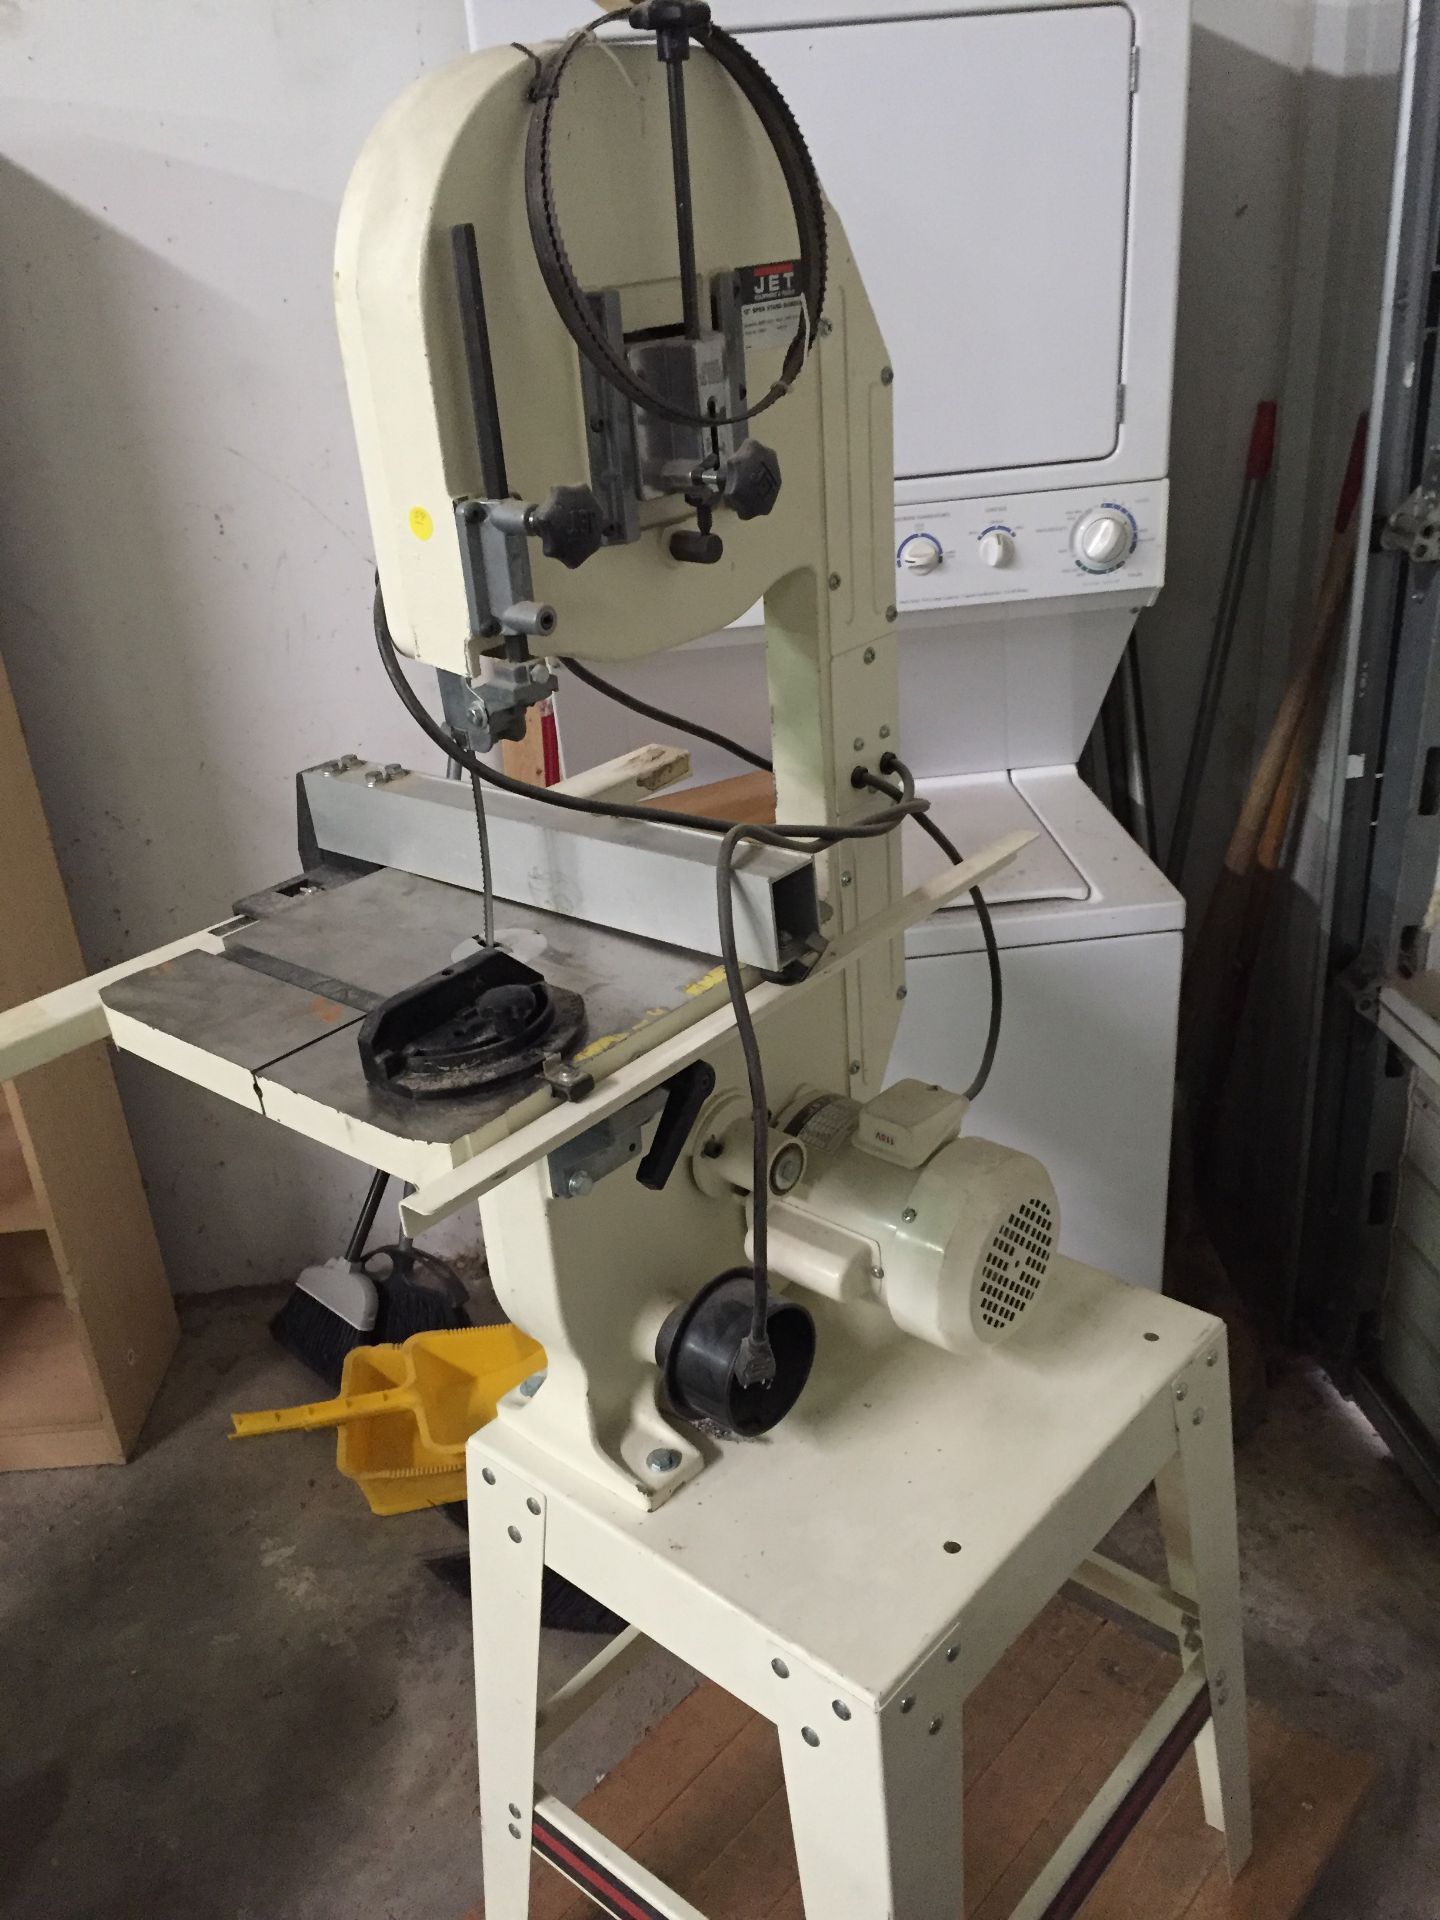 Jet 12" Vertical Band Saw M/N JWBS-120S, stock # 708901, with 24" X 36" wood dolly - Image 4 of 4